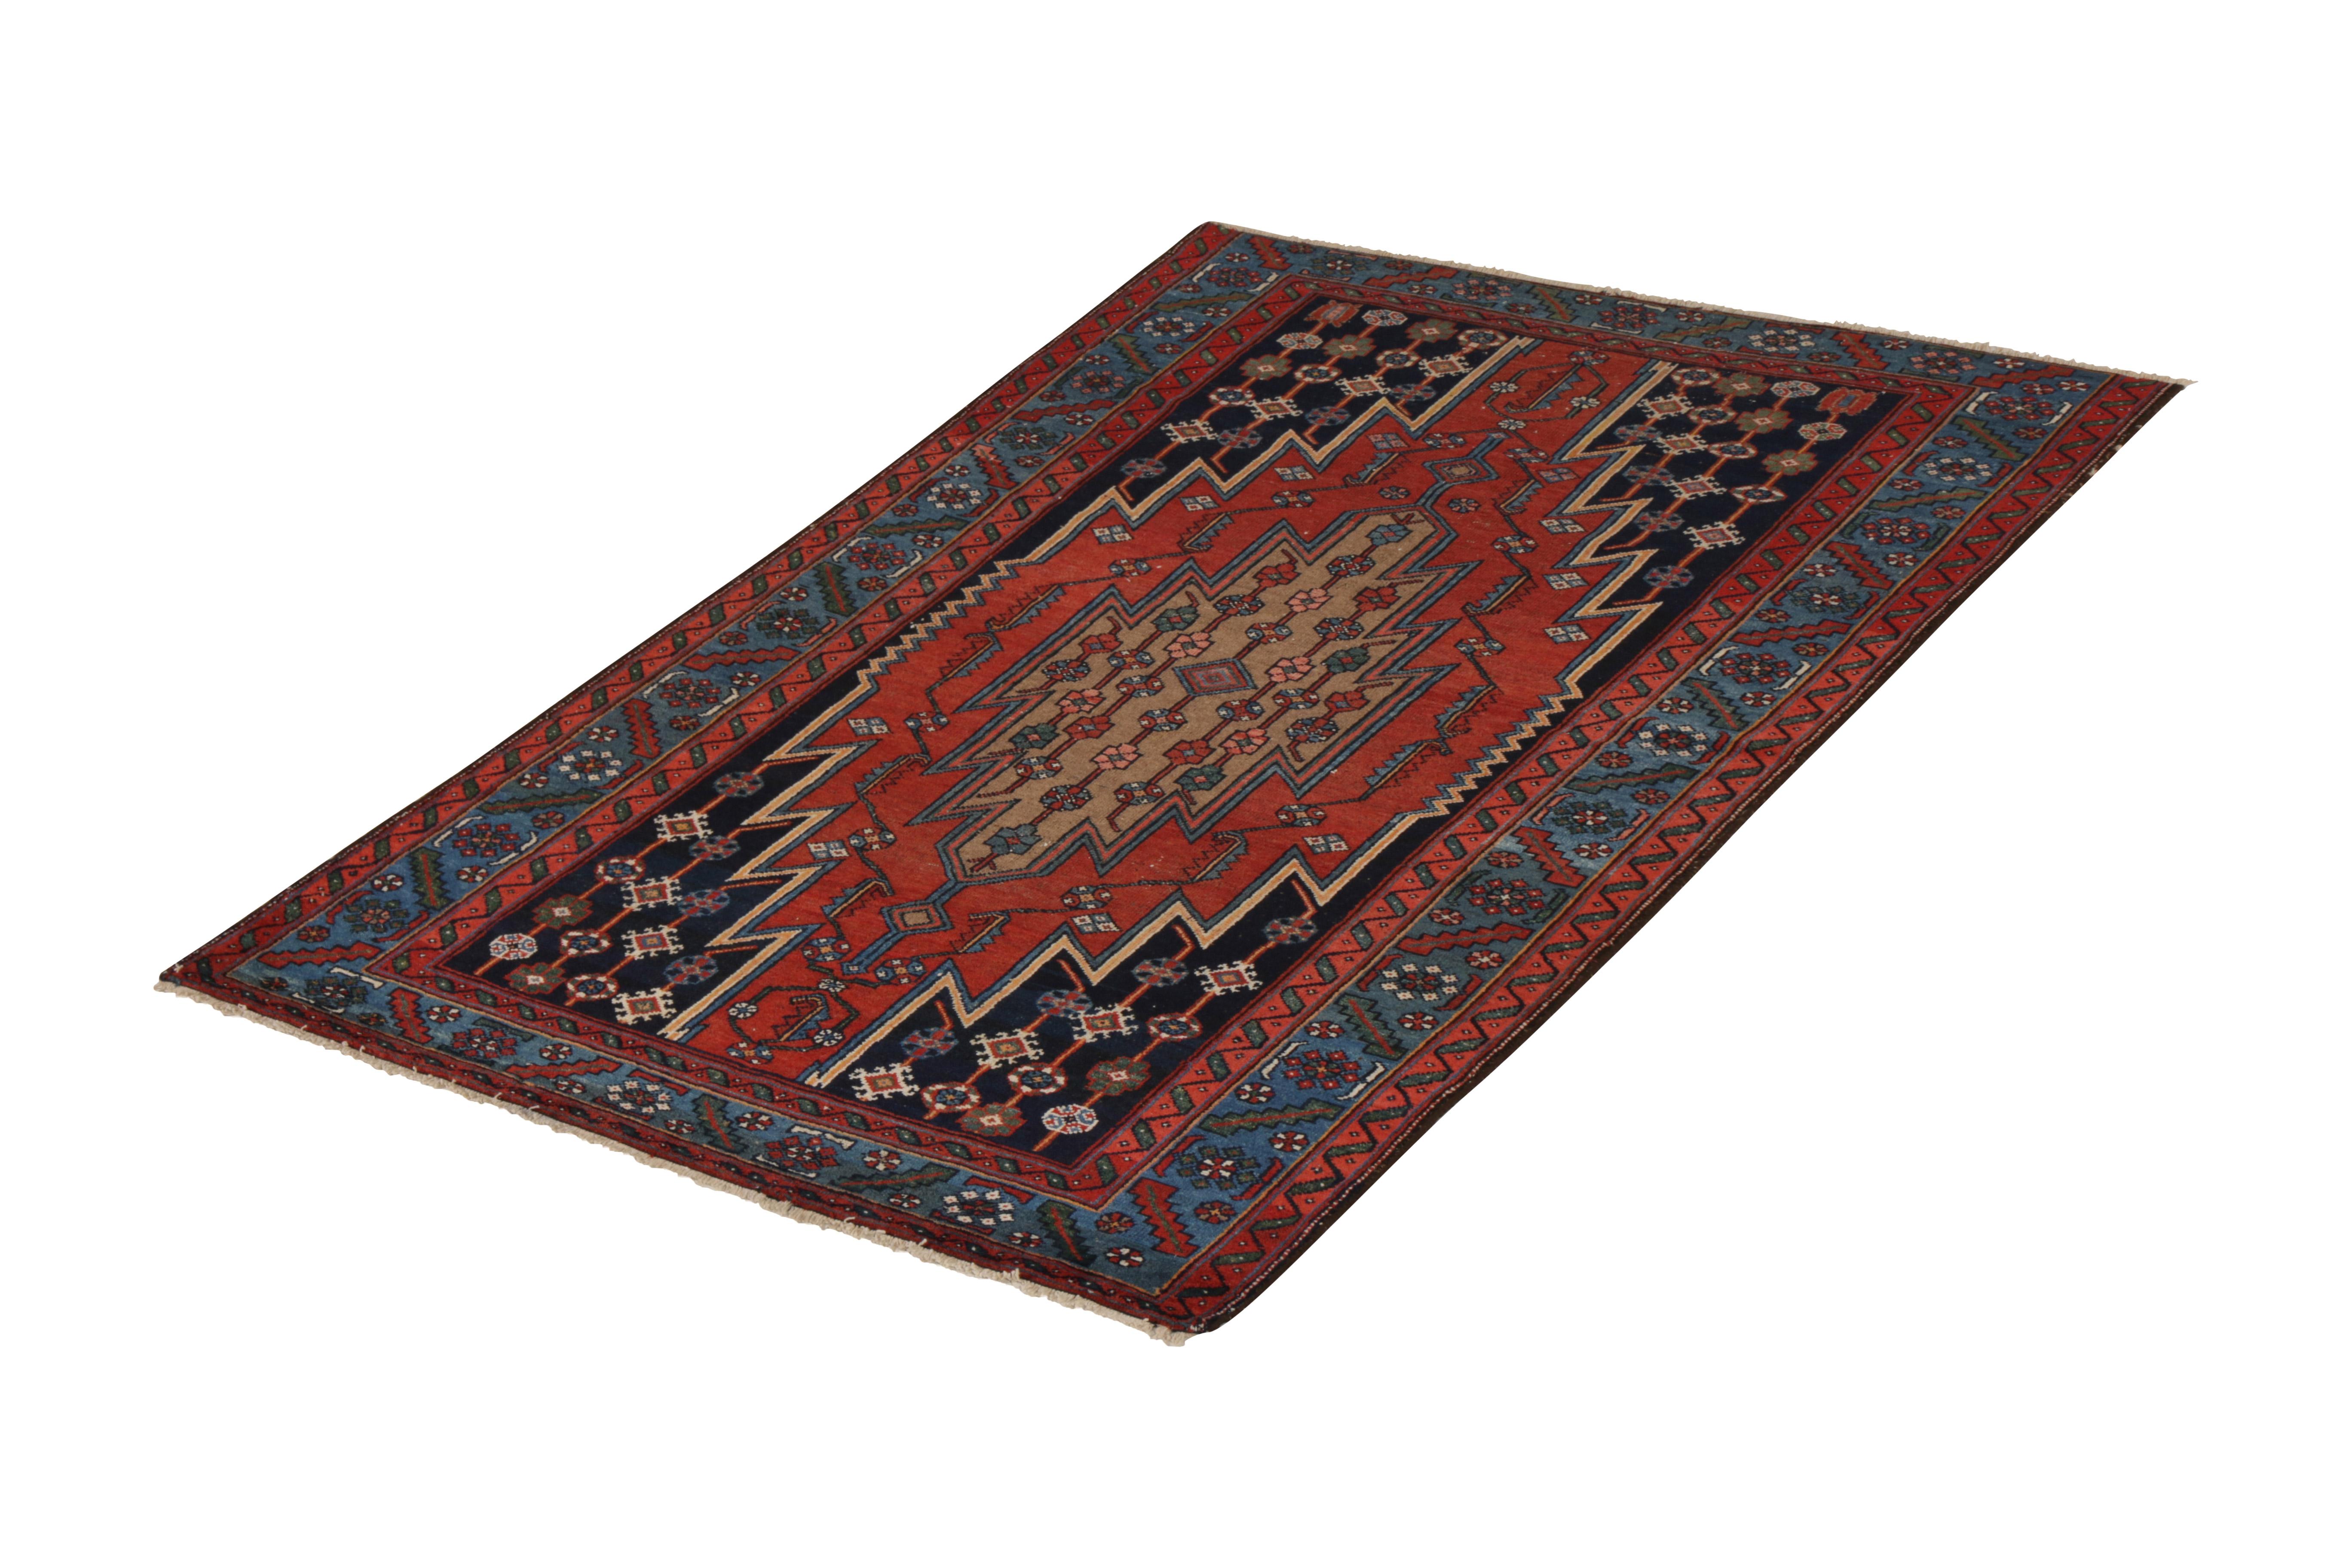 Hand knotted in wool originating circa 1910-1920, this antique Persian rug connotes an early 20th century Mazlaghan rug design, a distinctive lineage among Classic Persian rugs known among many traits for expressive medallion patterns like this red